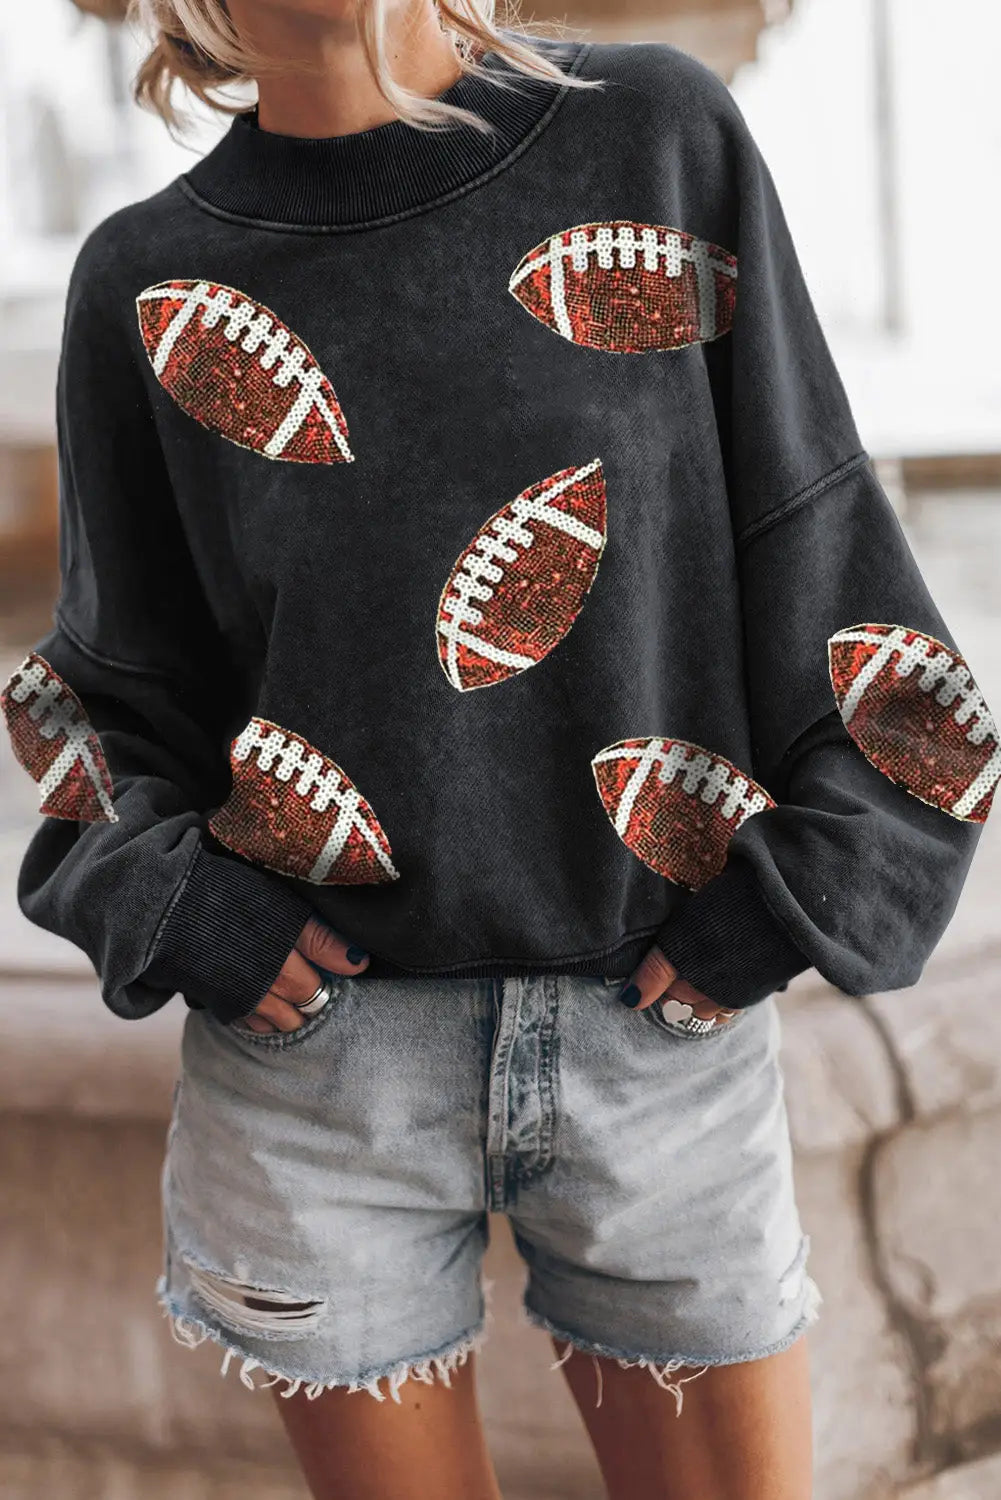 Black sequin fringed rugby casual sweatshirt - black2 / 2xl / 70% polyester + 30% cotton - graphic